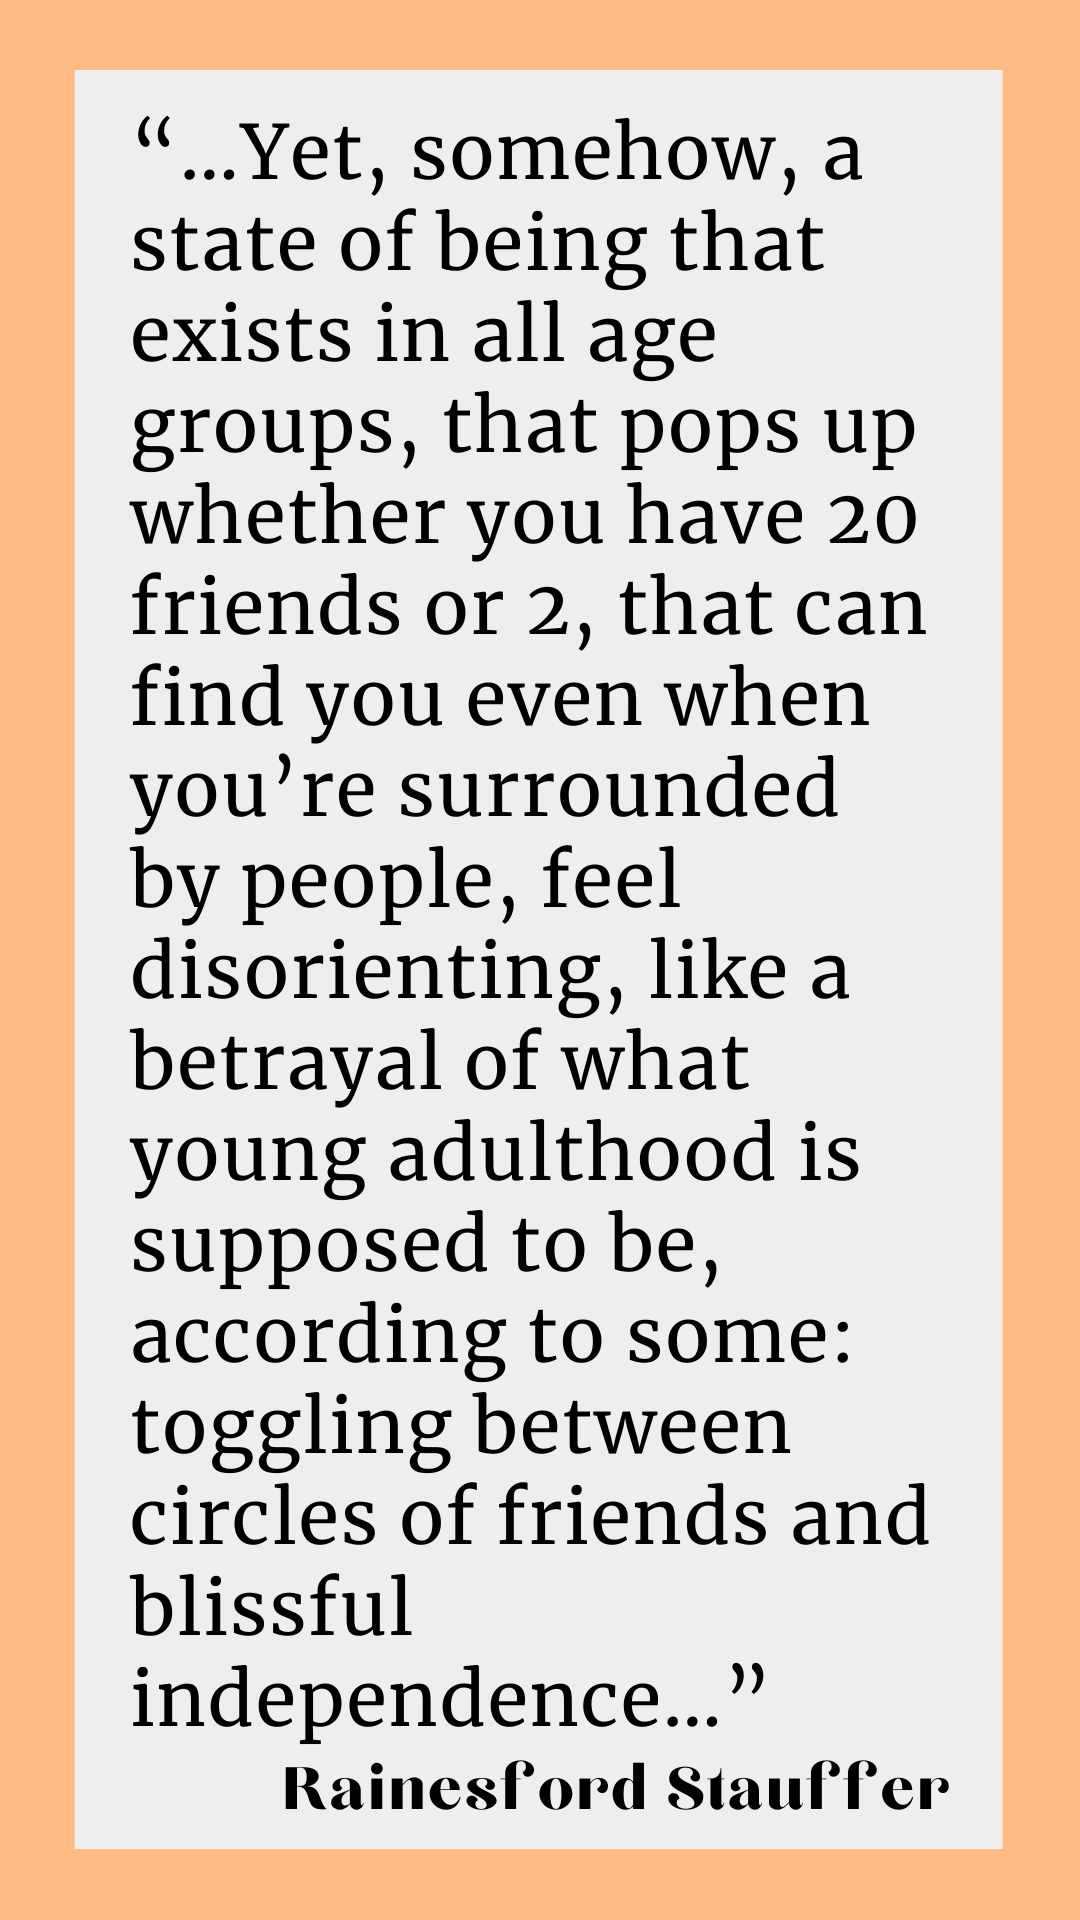 ”Yet, somehow, a state of being that exists in all age groups, that pops up whether you have 20 friends or 2, that can find you even when you’re surrounded by people, feel disorienting, like a betrayal of what young adulthood is supposed to be, according to some: toggling between circles of friends and blissful independence,” said Rainesford Stauffer.